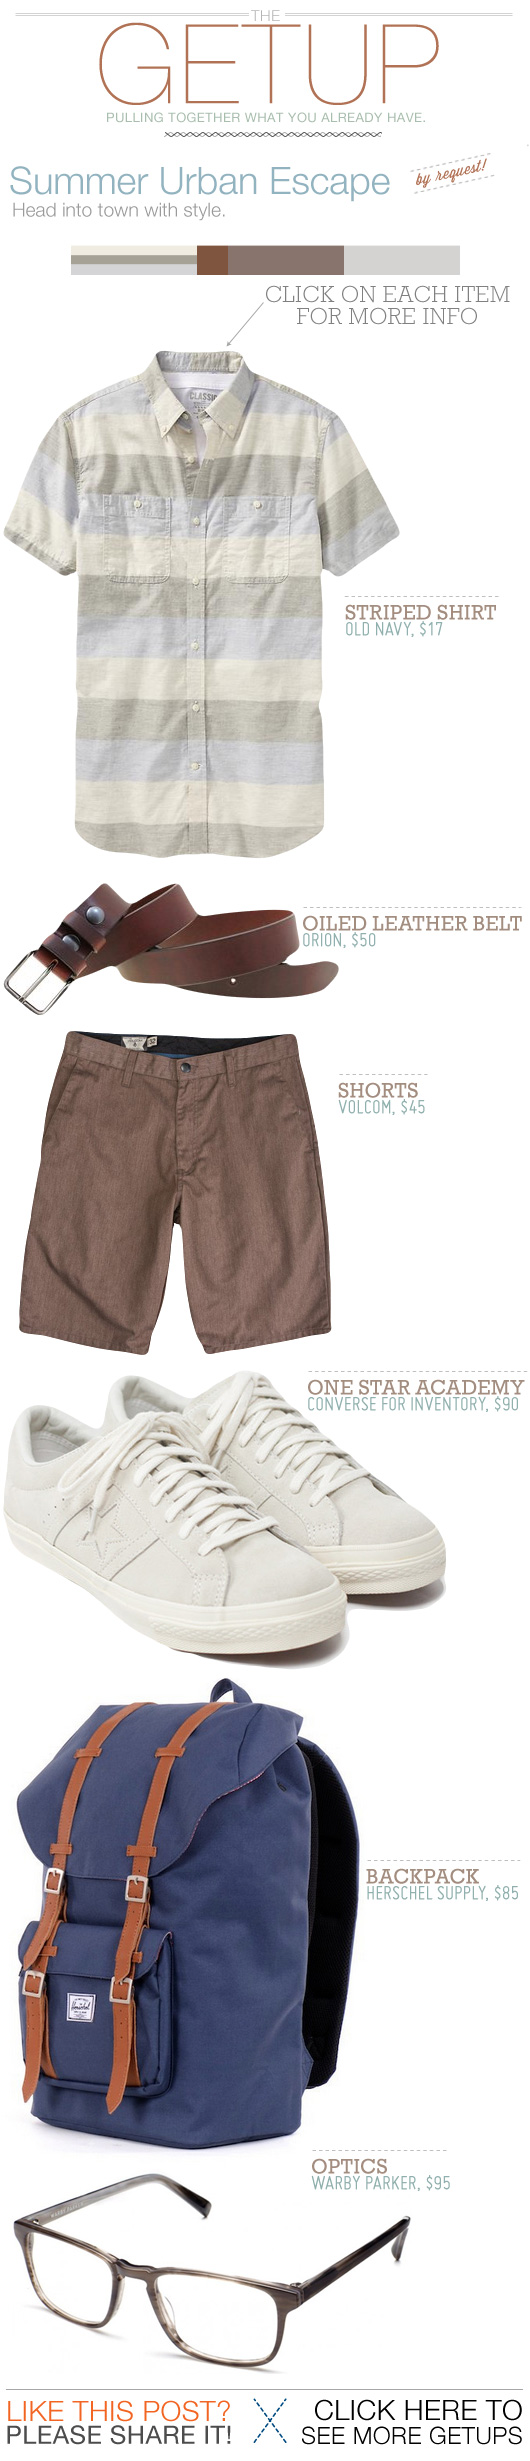 Getup Summer Urban Escape - striped shirt, brown shorts, white sneakers